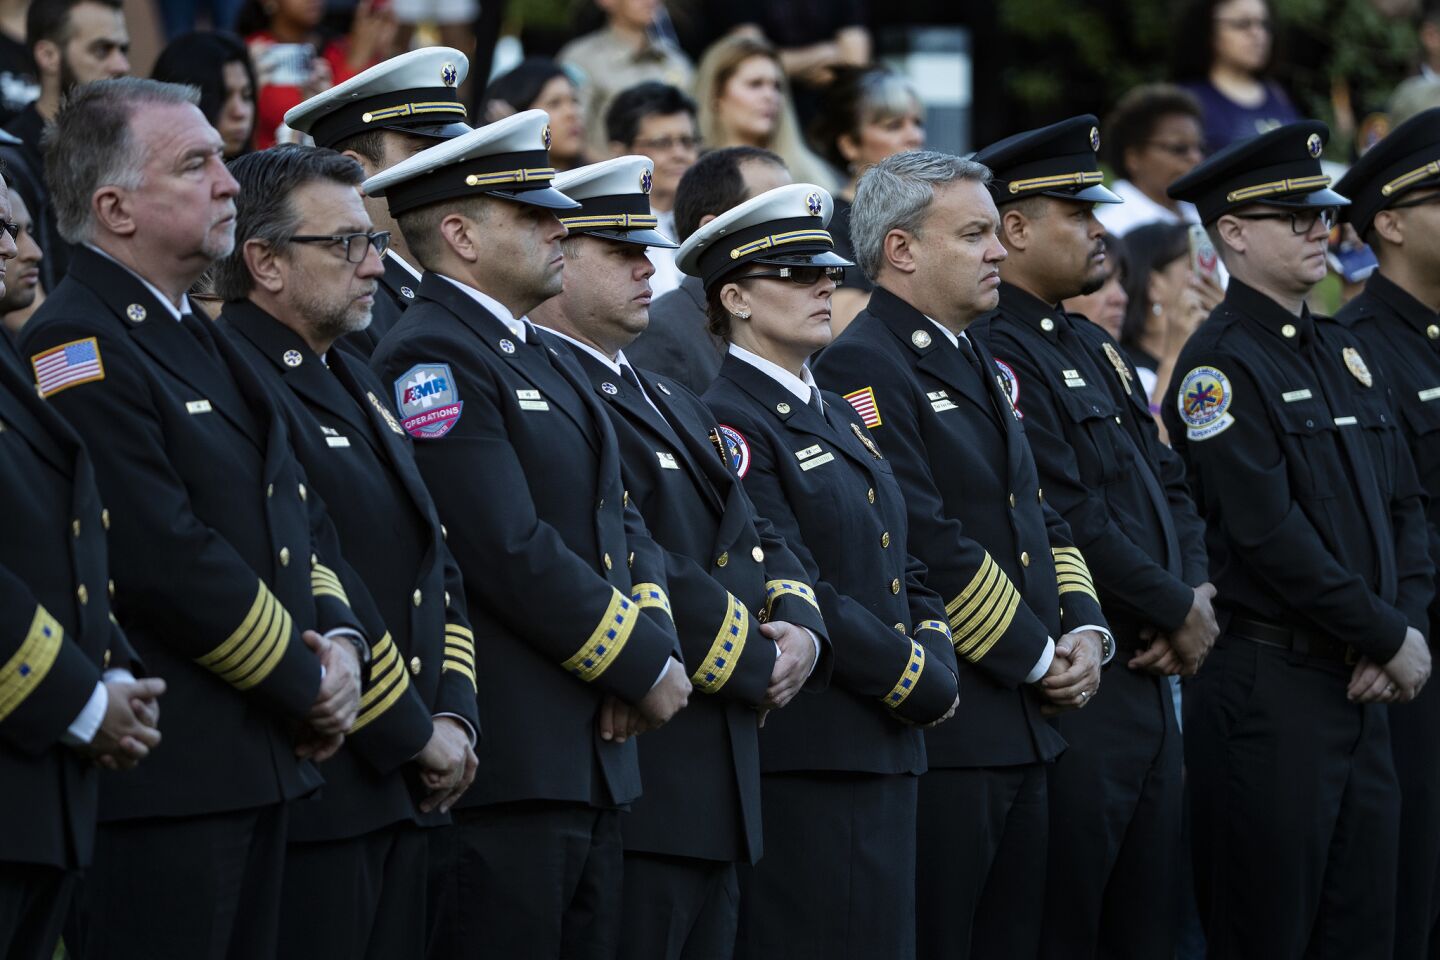 First responders attend the sunrise remembrance to mark the first anniversary of the Las Vegas mass shooting.